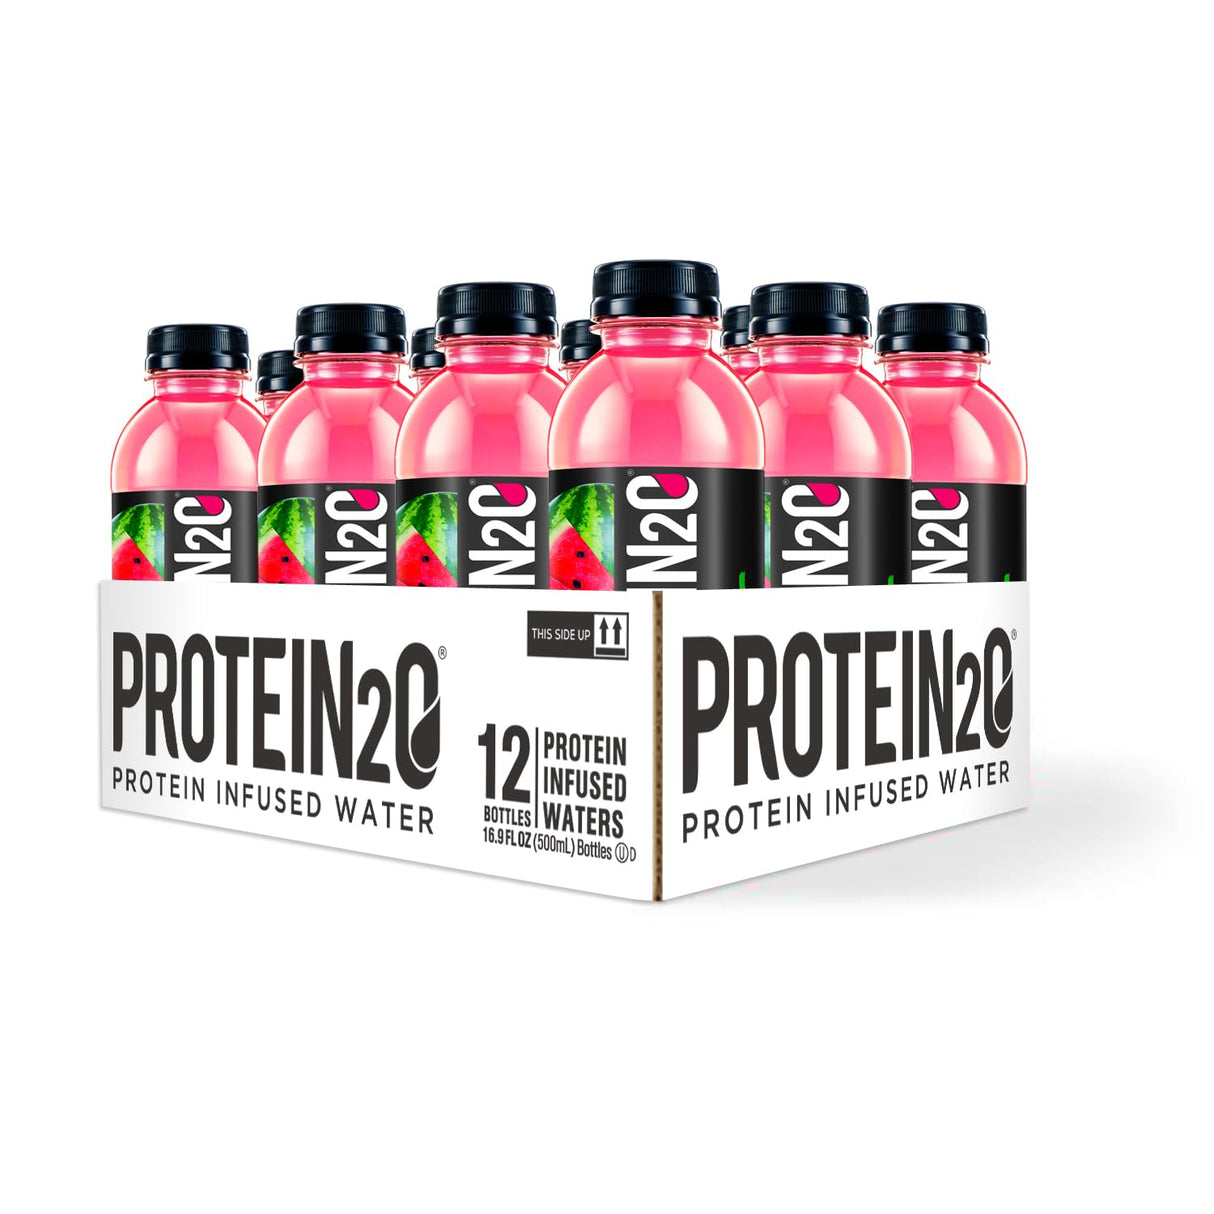 Protein Infused Water - Protein2o